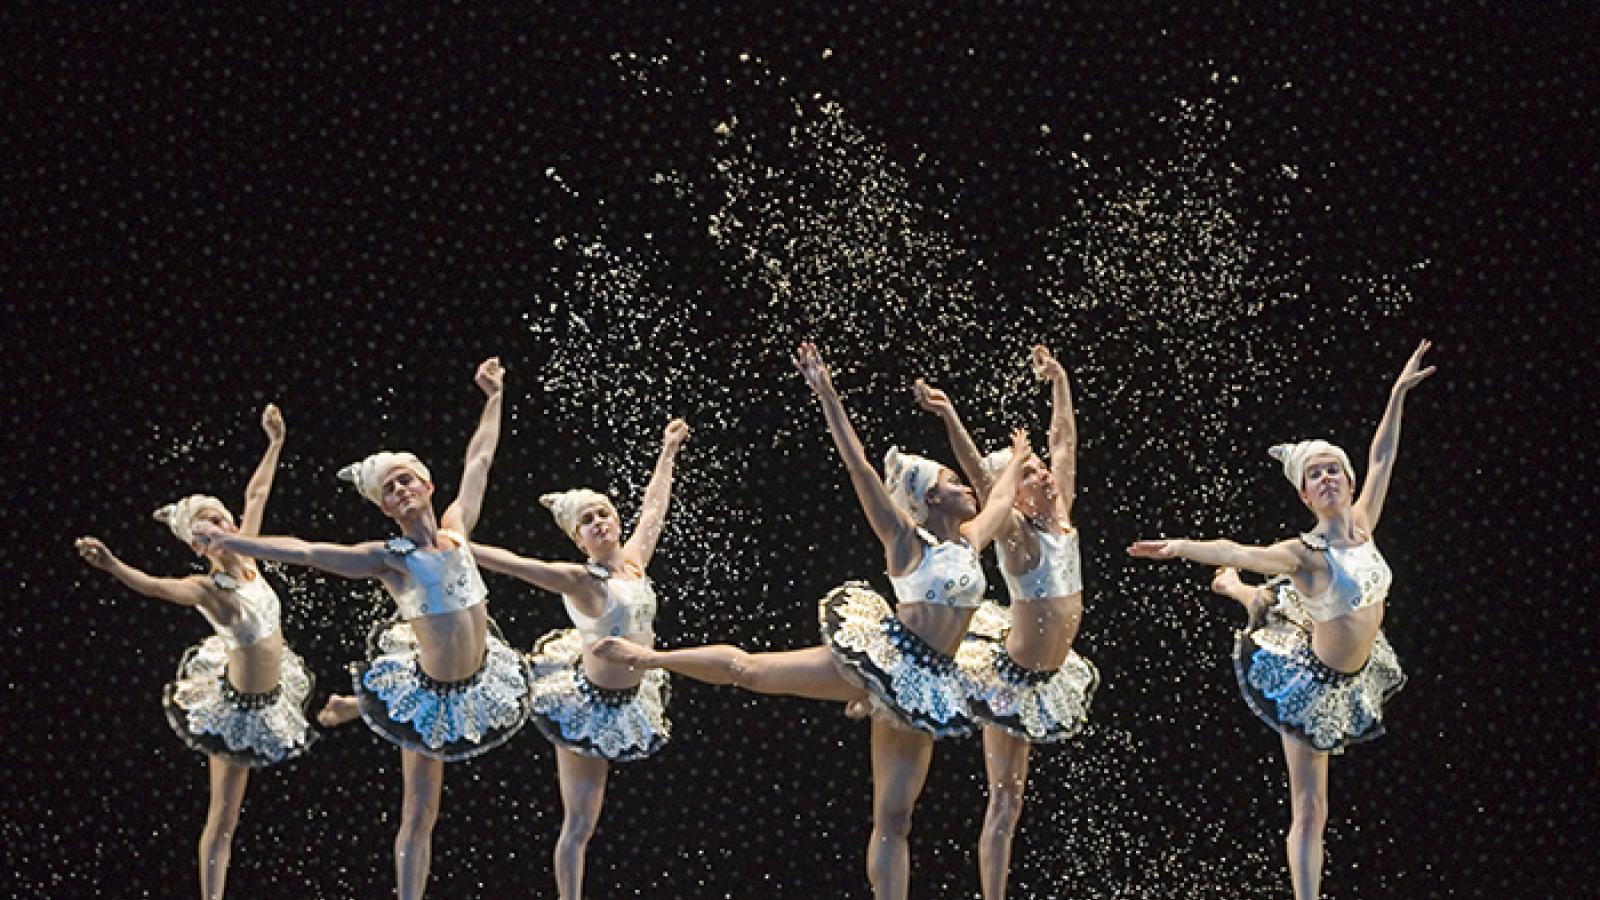 Dancers in tutus with arms in the air, dancing.